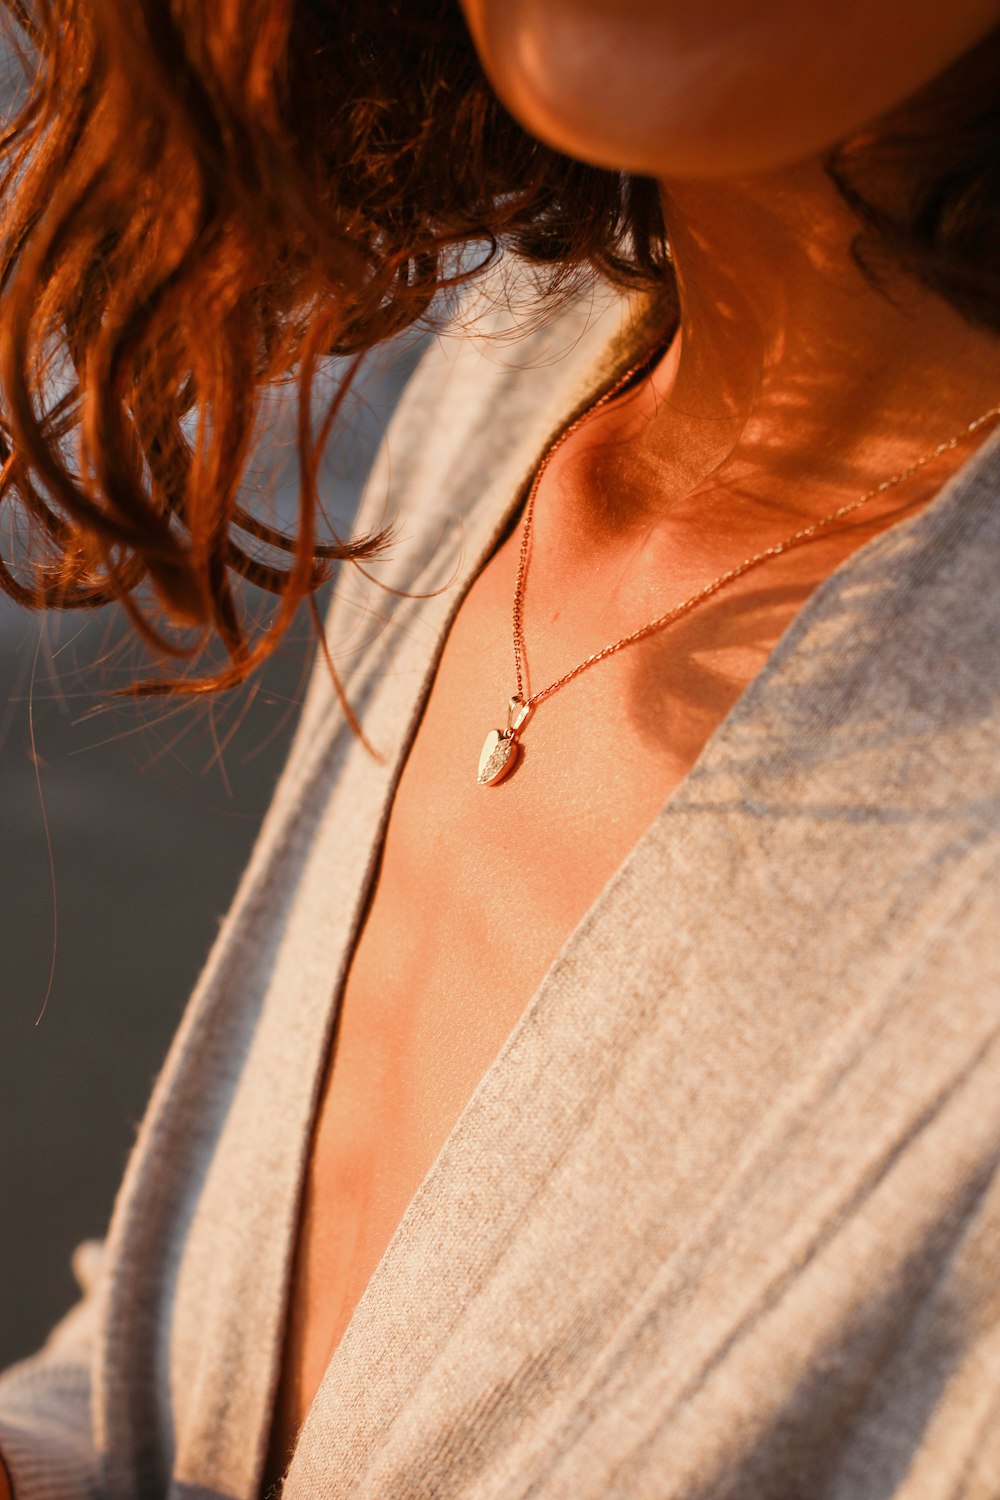 a close up of a person wearing a necklace